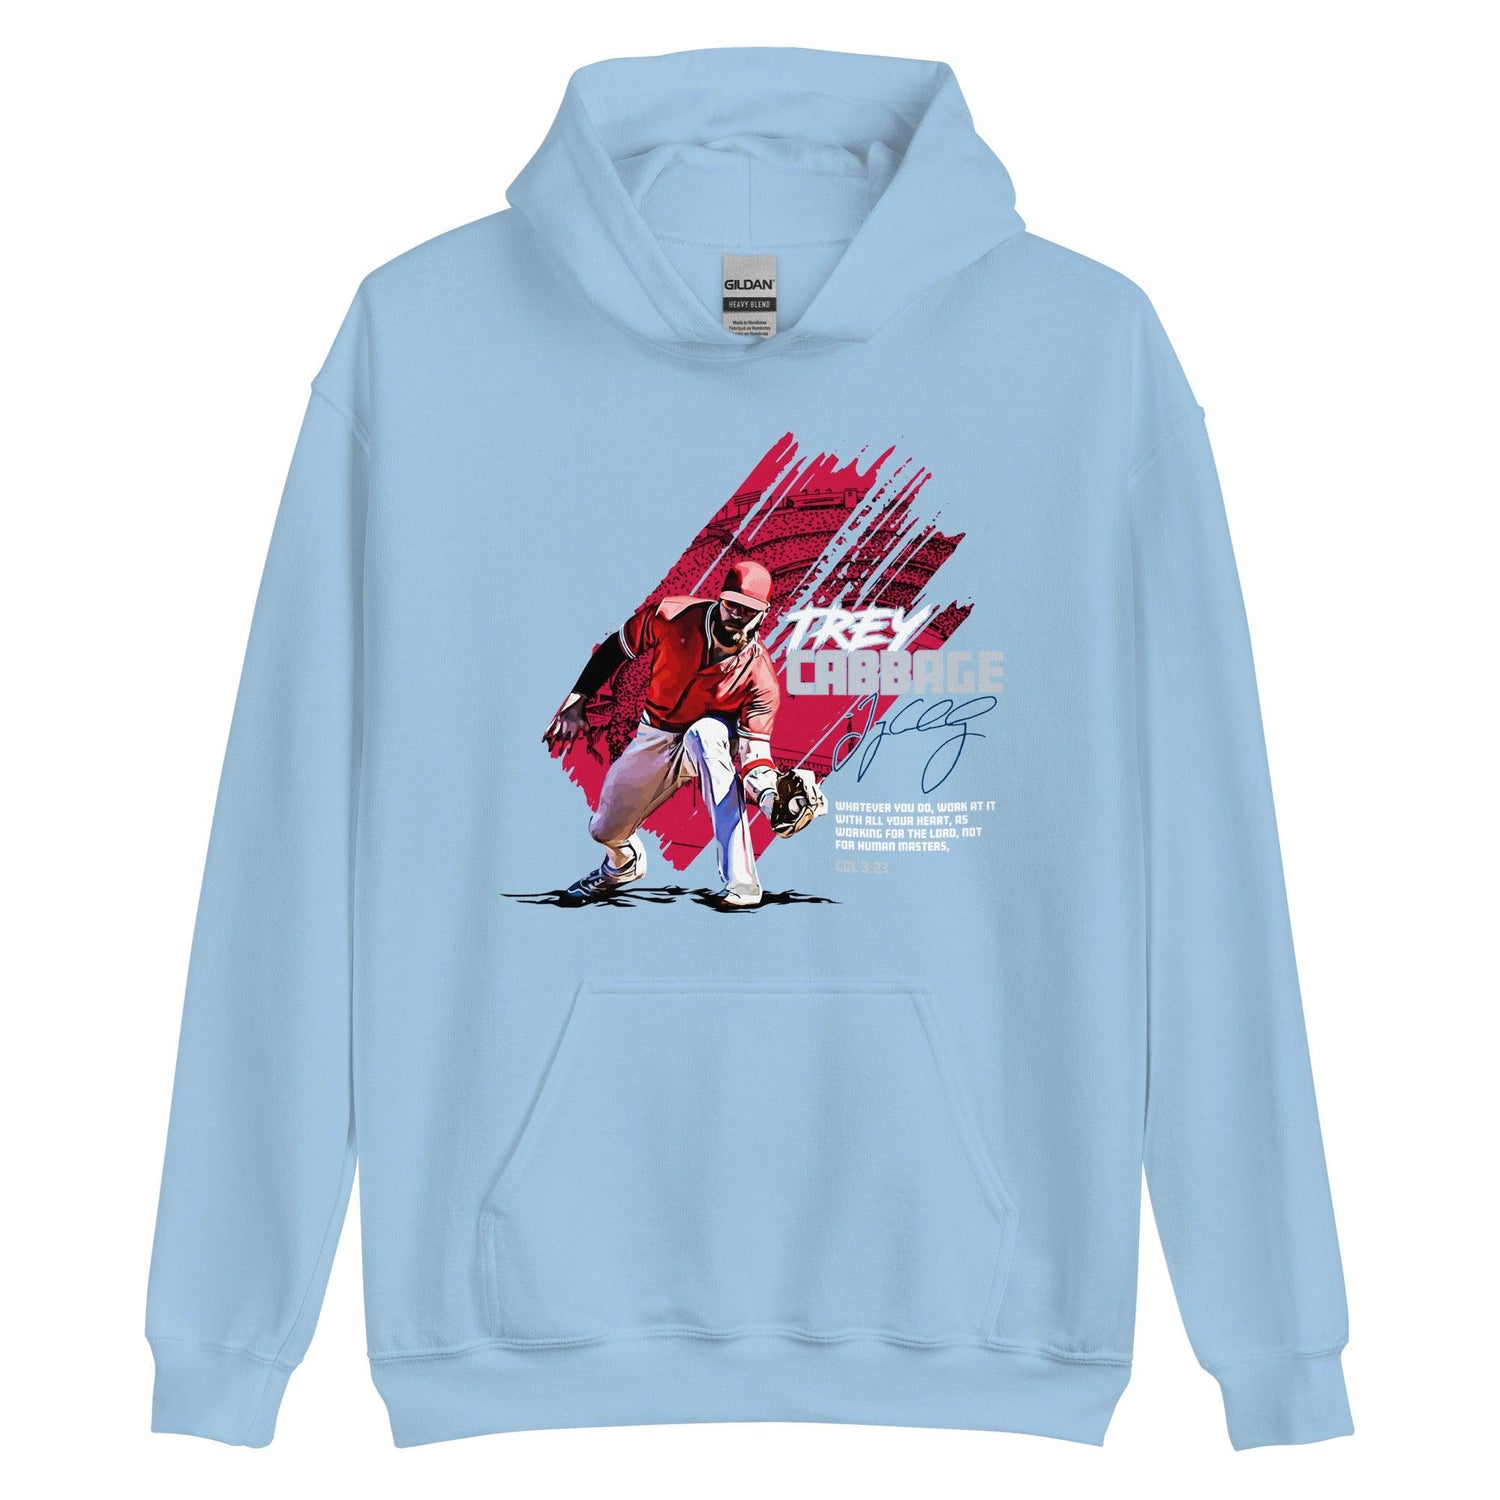 Trey Cabbage “Signature” Hoodie - Fan Arch